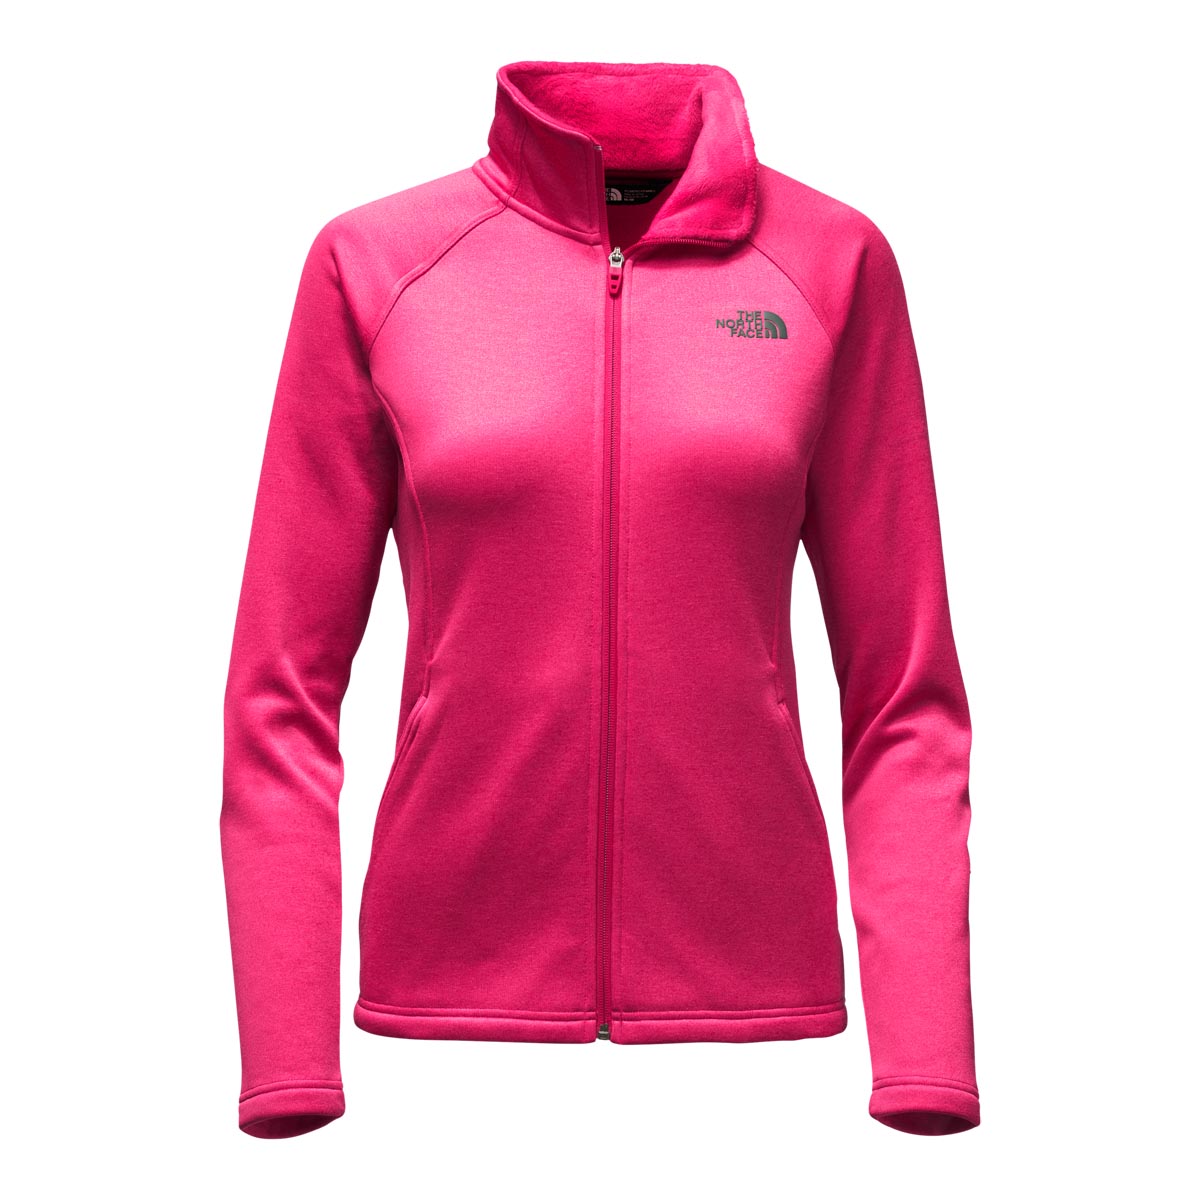 The North Face Women's Agave Full Zip Discontinued Pricing